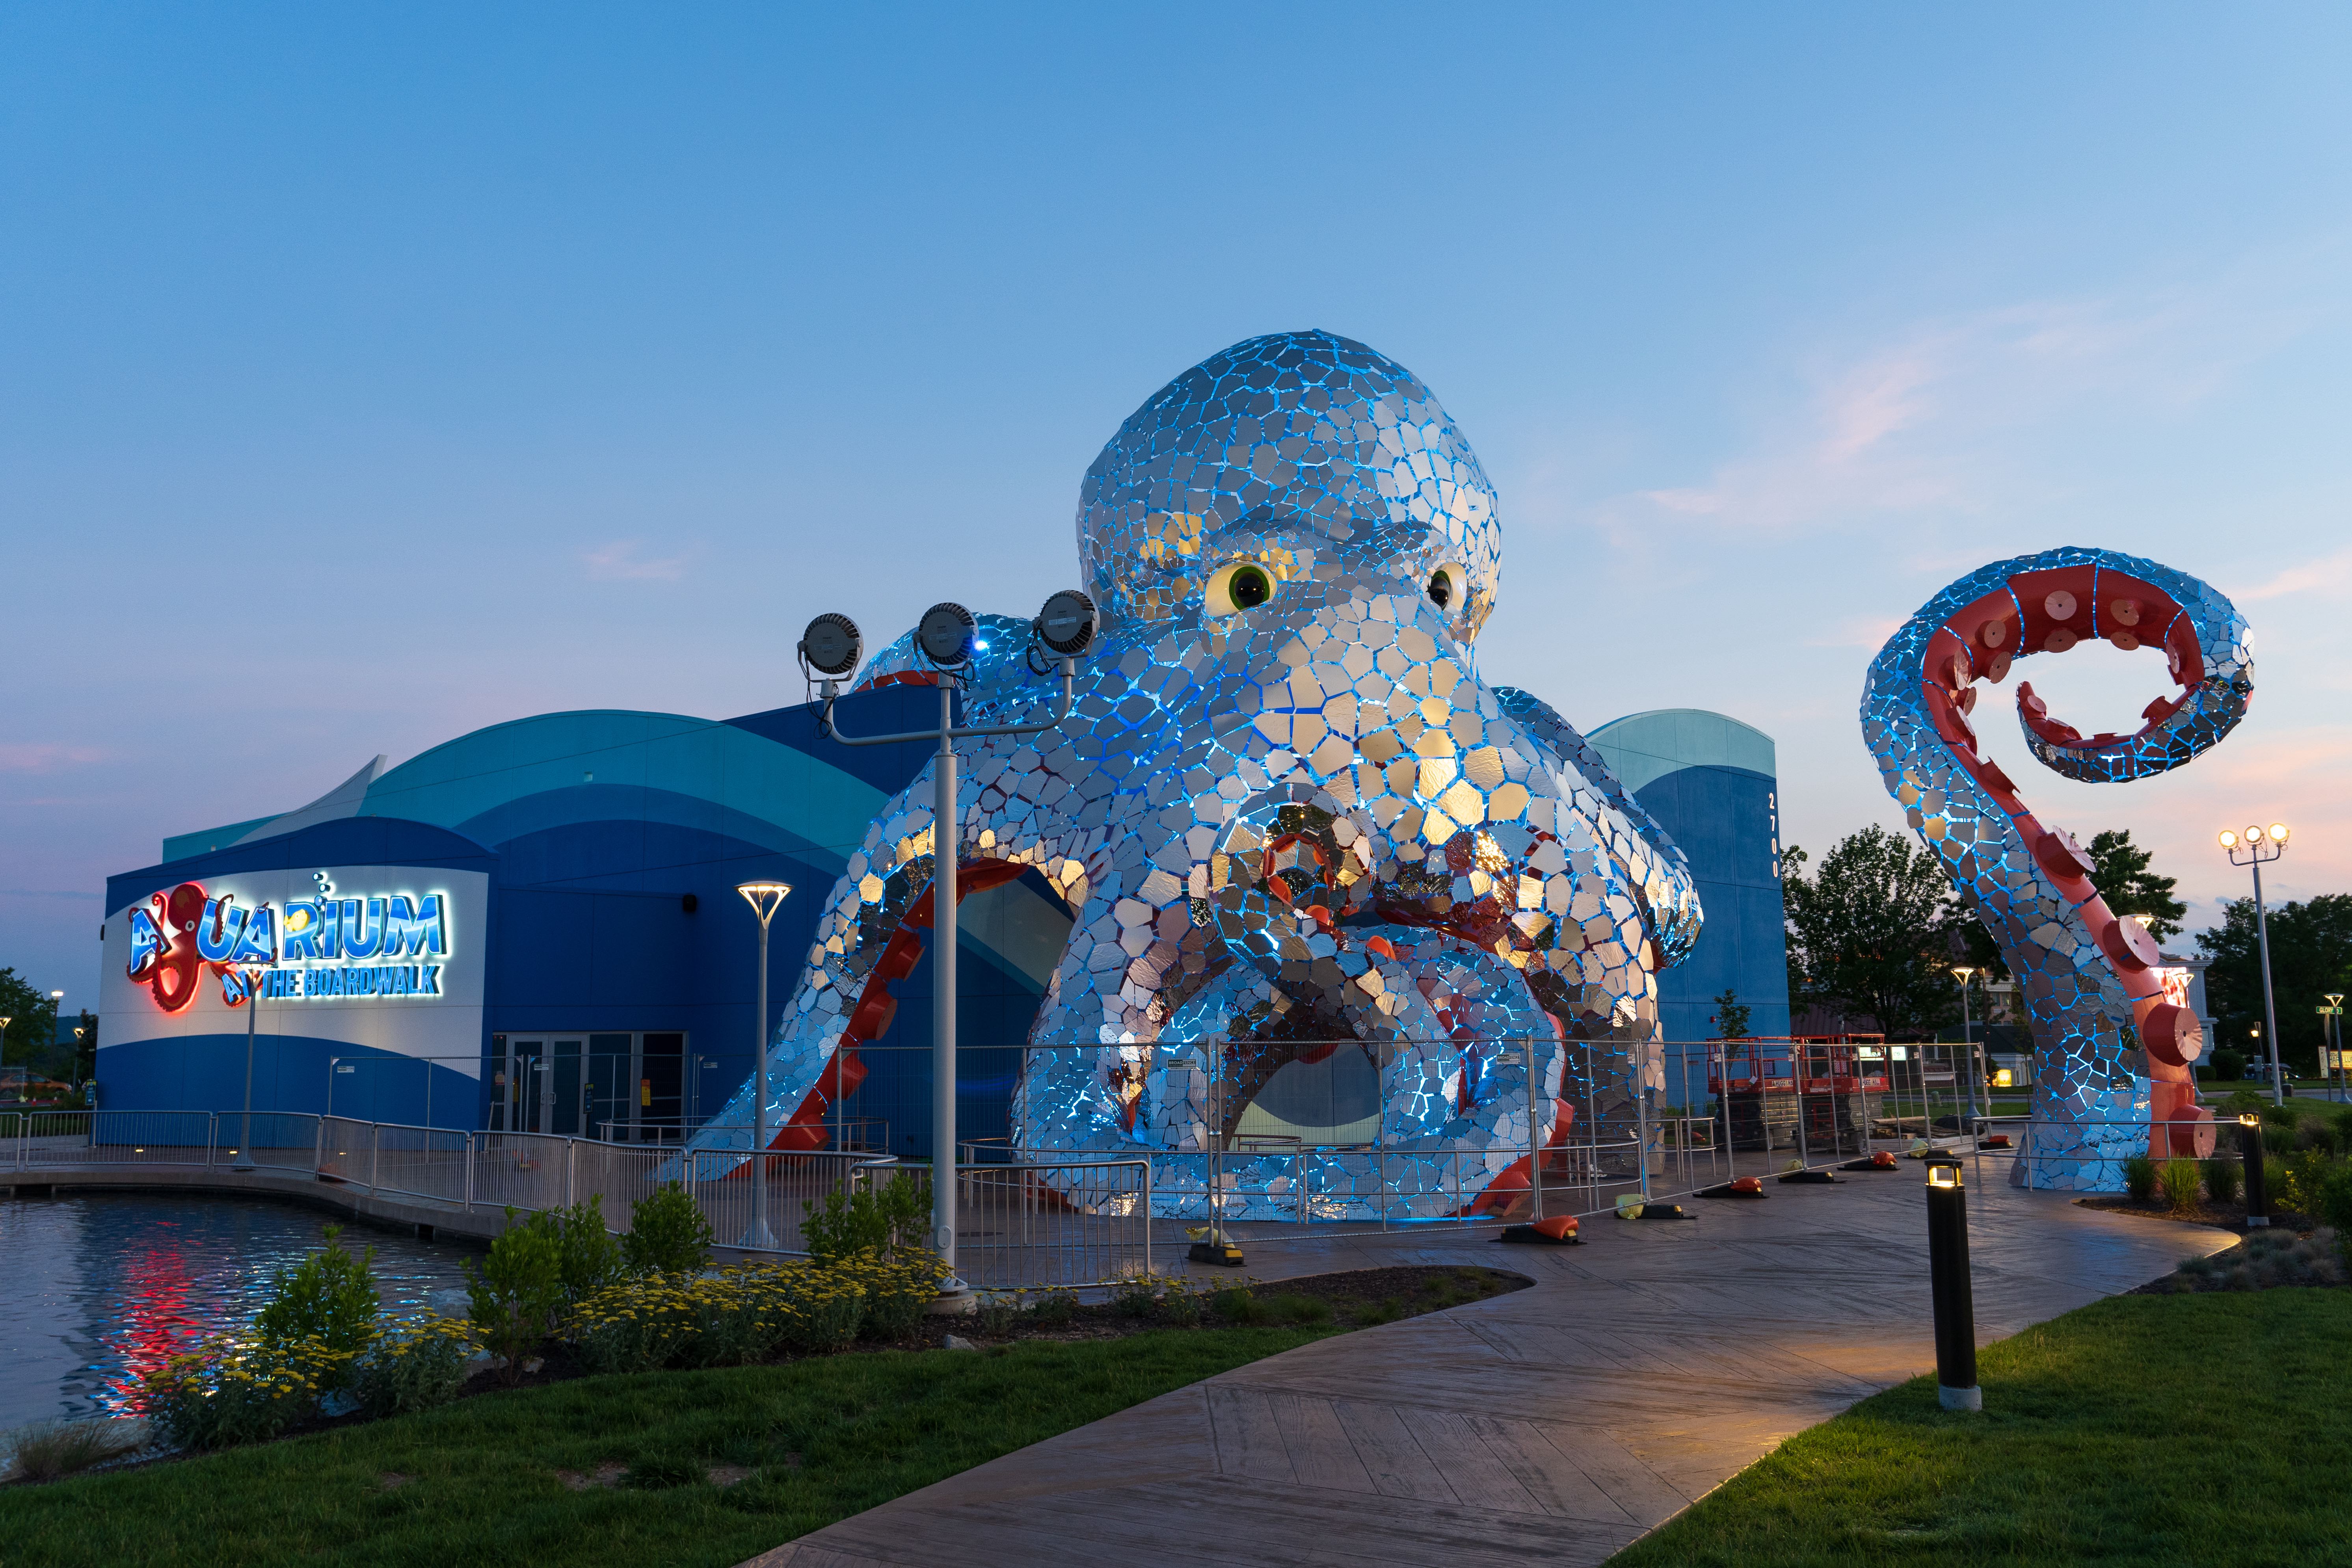 Aquarium at the Branson boardwalk at dusk with the lights on the giant octopus covering the building.